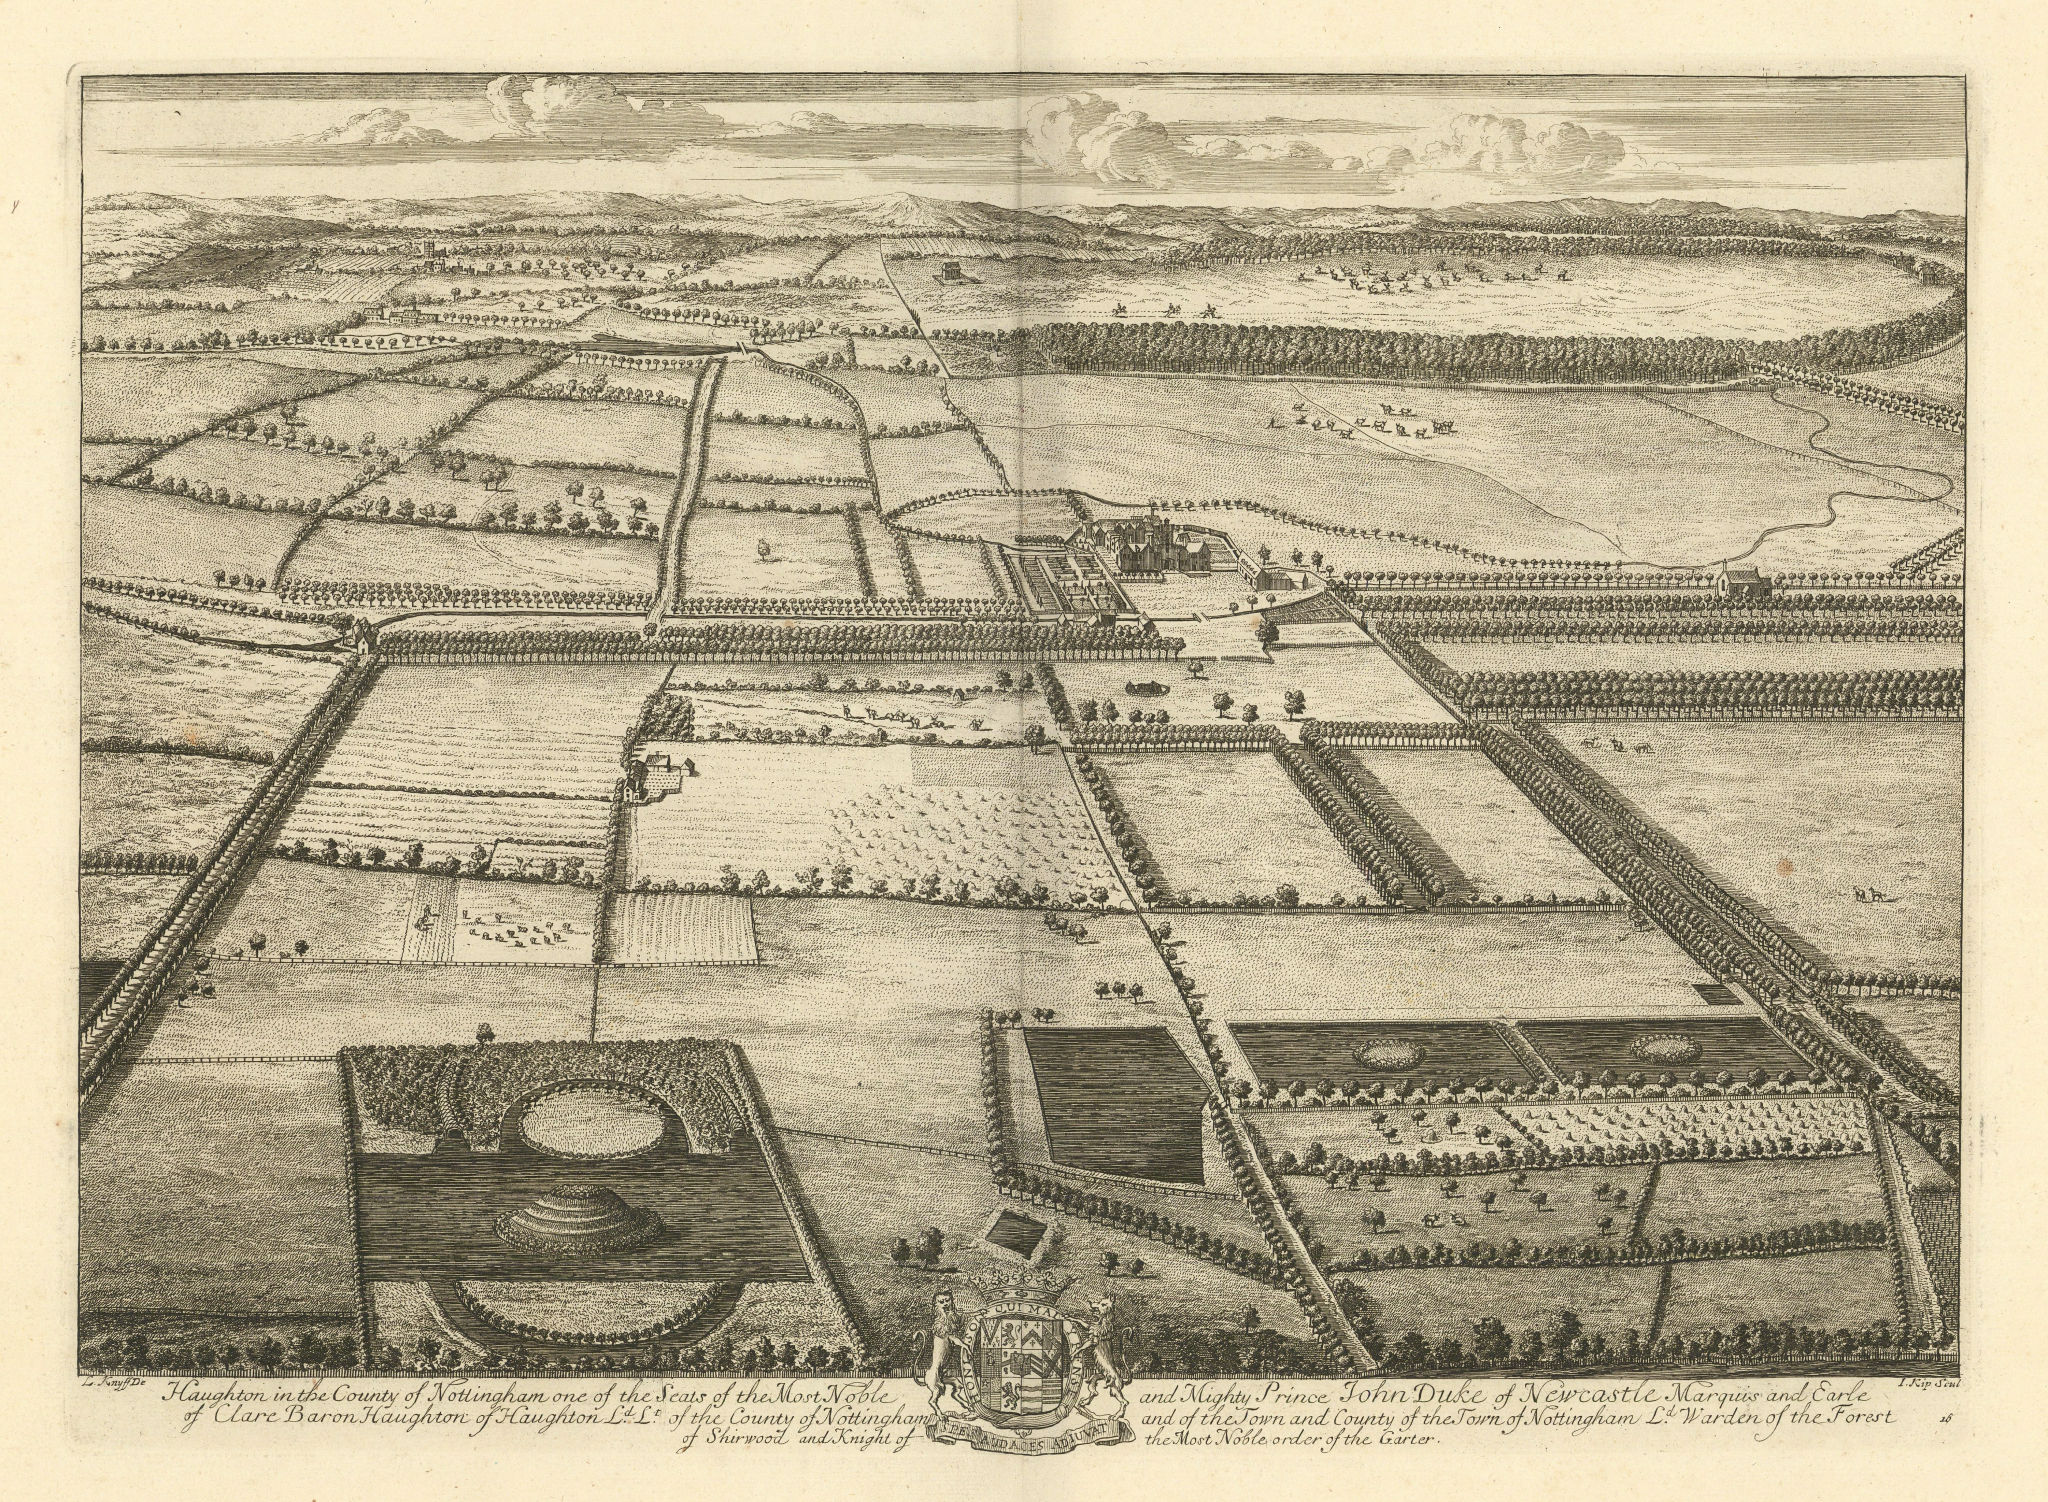 Associate Product Haughton Hall by Kip & Knyff. "Haughton in the County of Nottingham" 1709